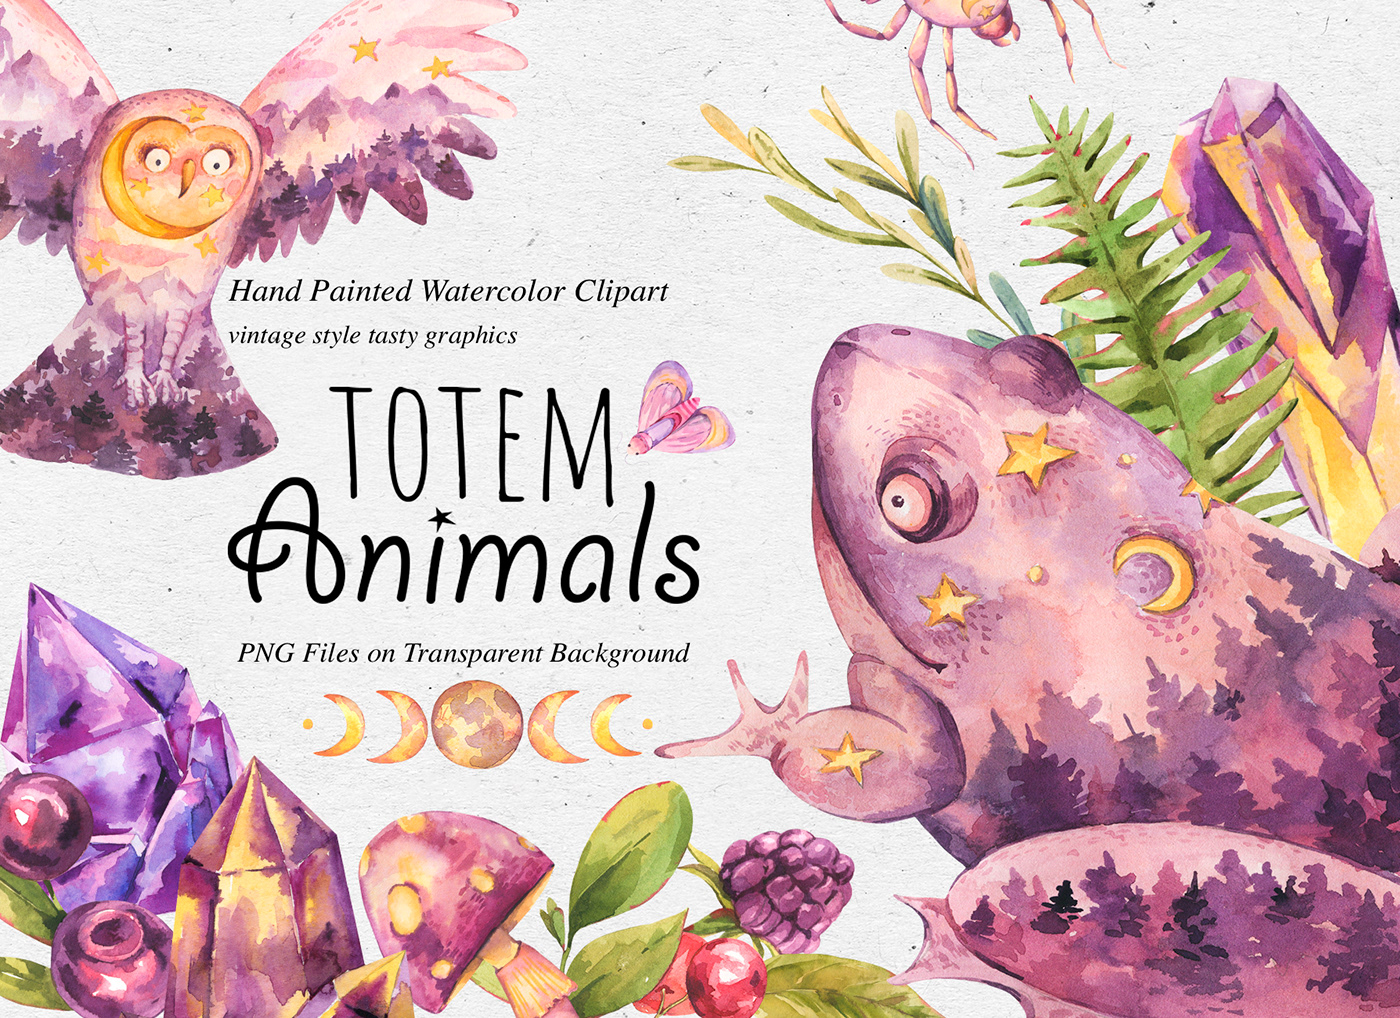 book illustration Character design  Digital Art  ILLUSTRATION  painting   sacred animals seamless pattern totem animals watercolor witchcraft